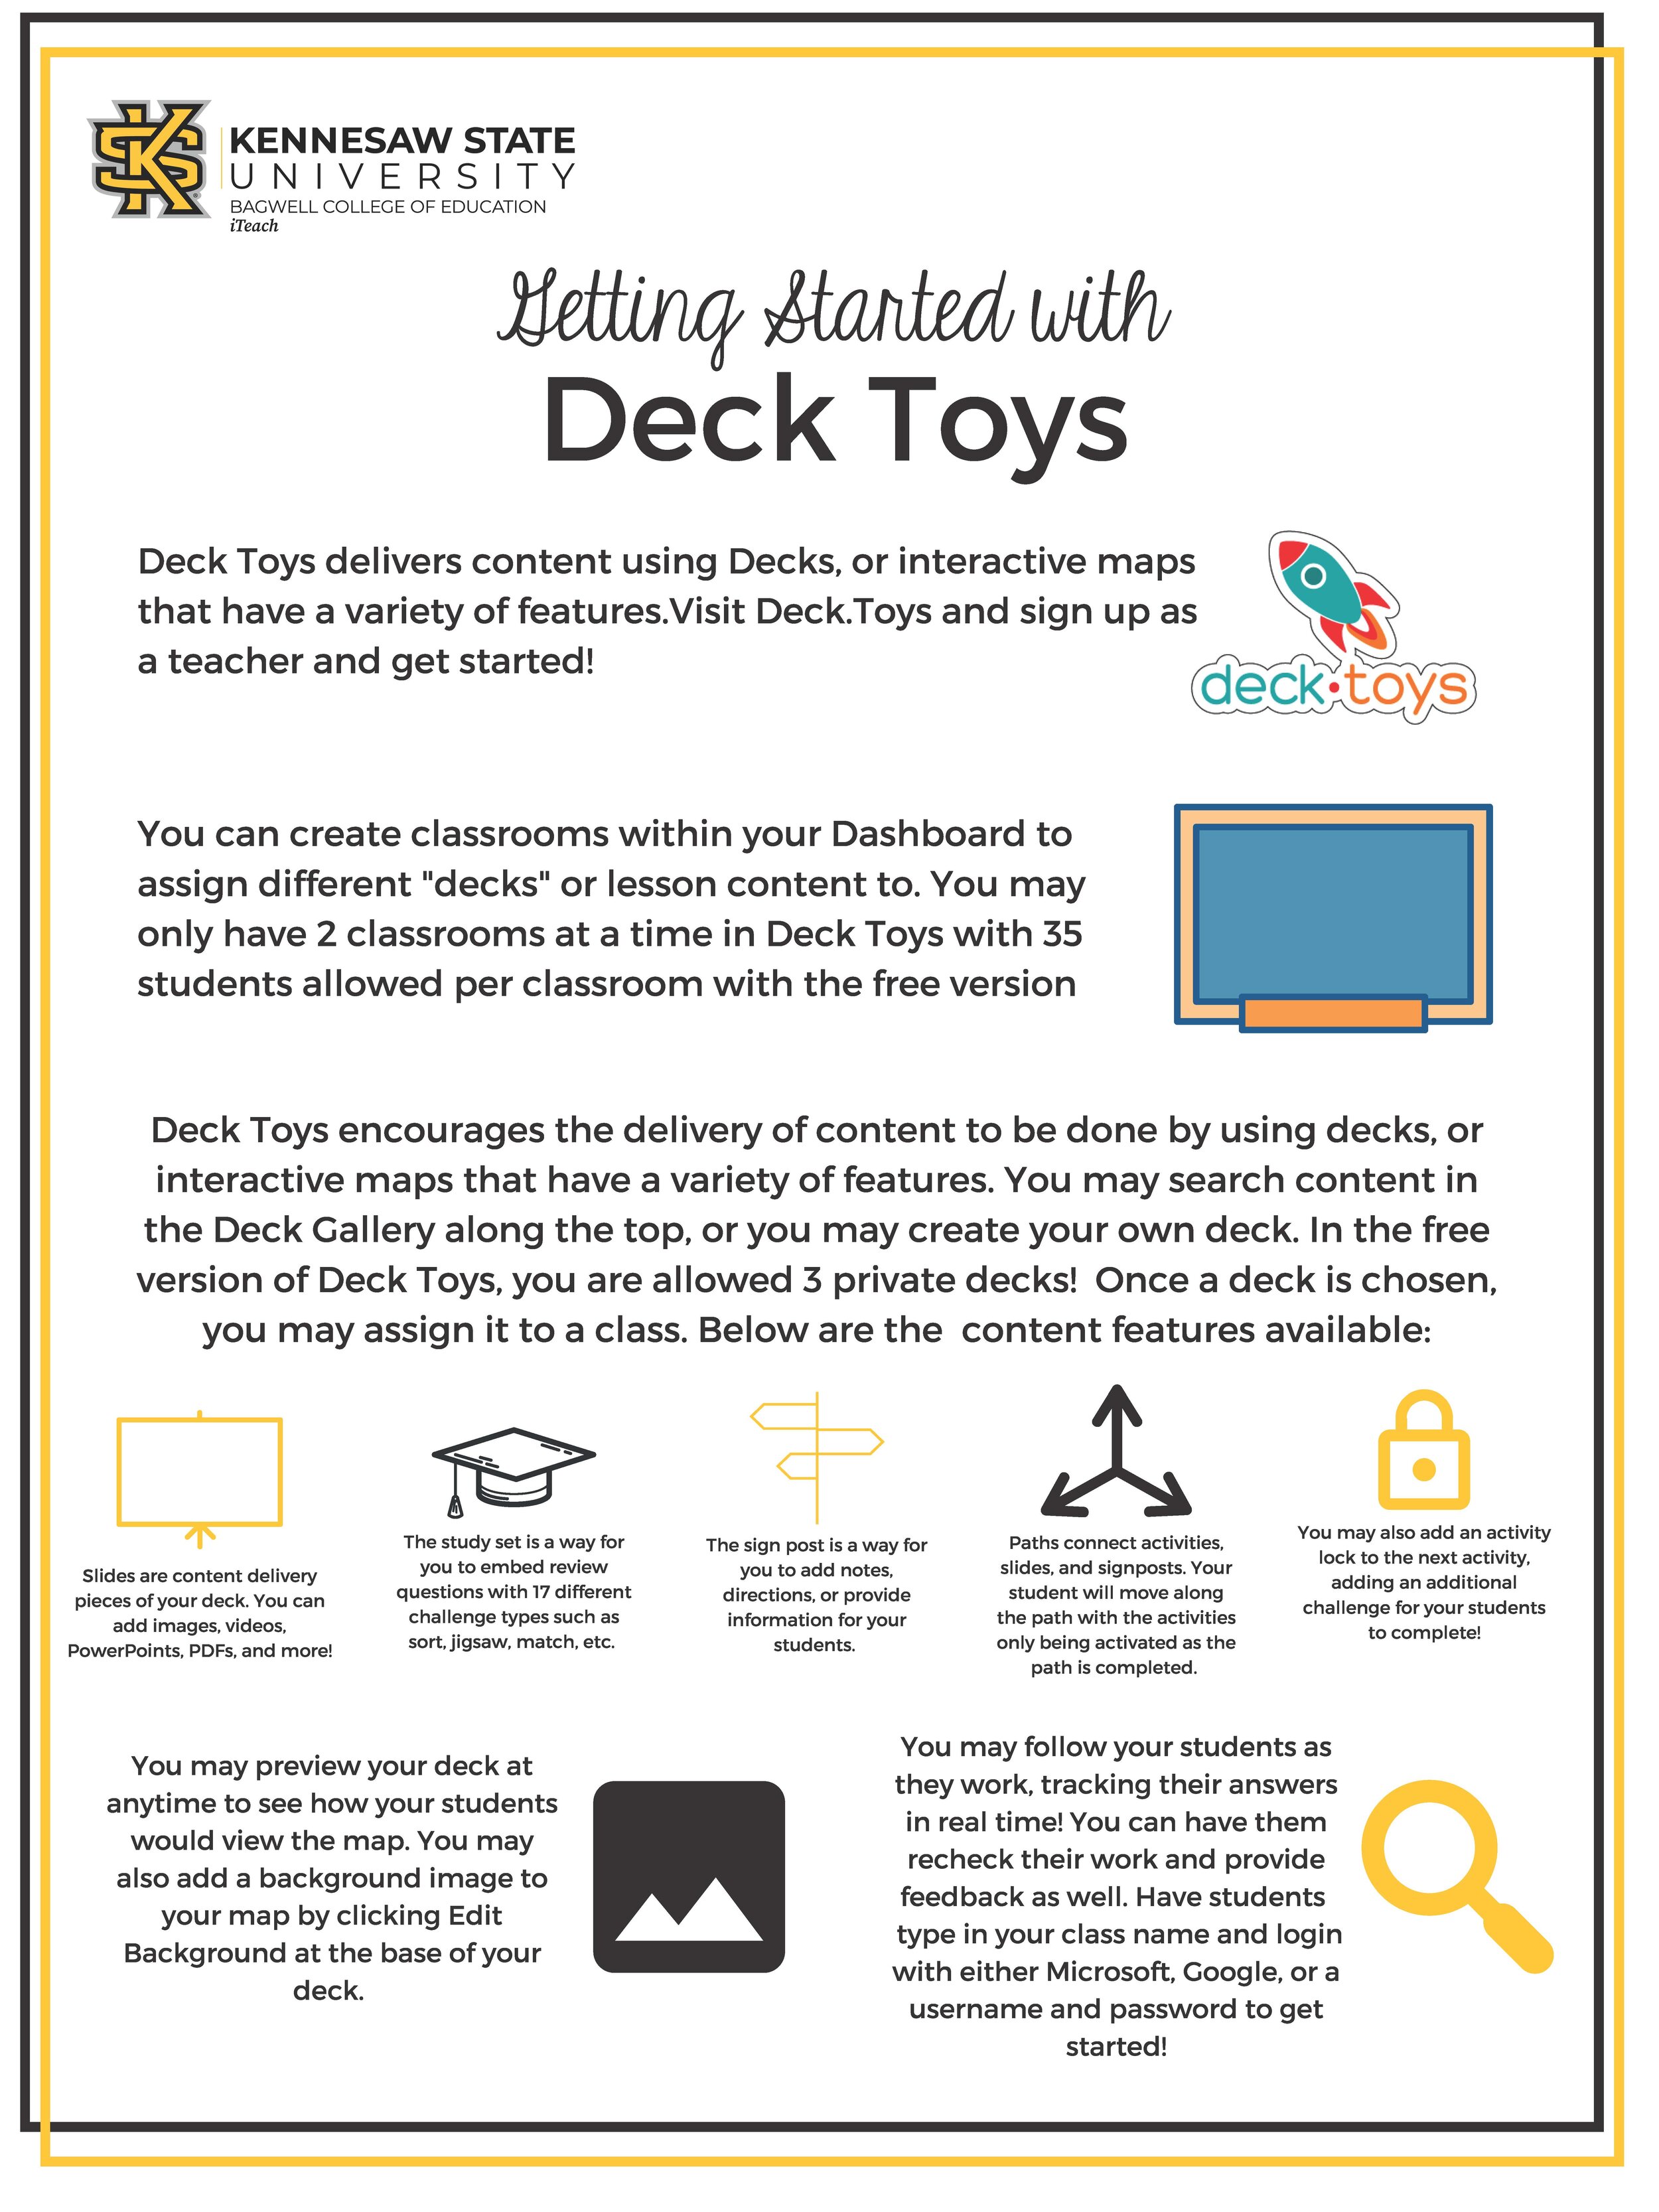 Getting Started with Deck Toys.jpg